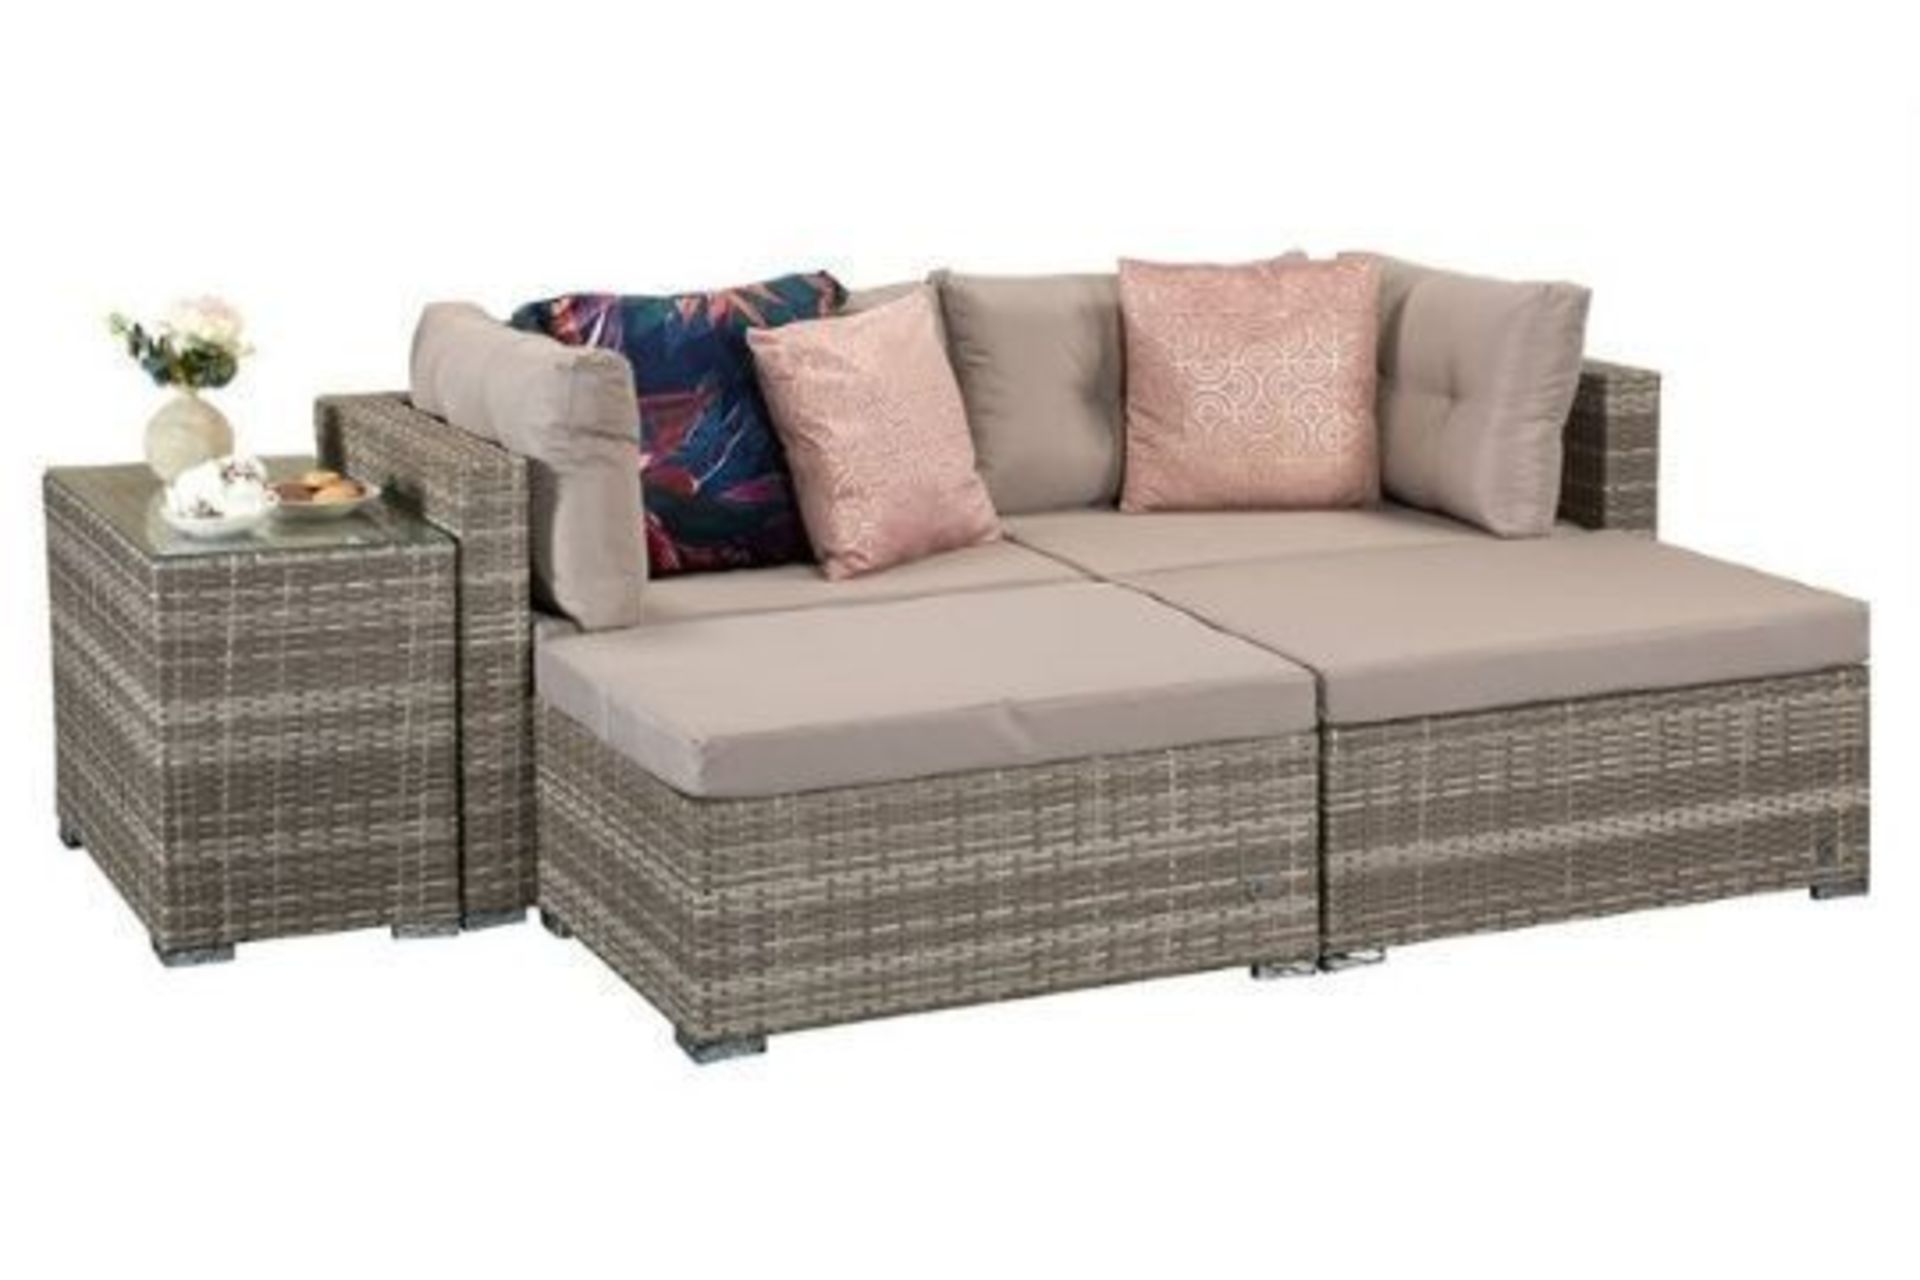 New & Boxed Luxury Signature Weave Garden UV Treated Rattan Harper Grey Stackable Multifunctional - Image 2 of 2